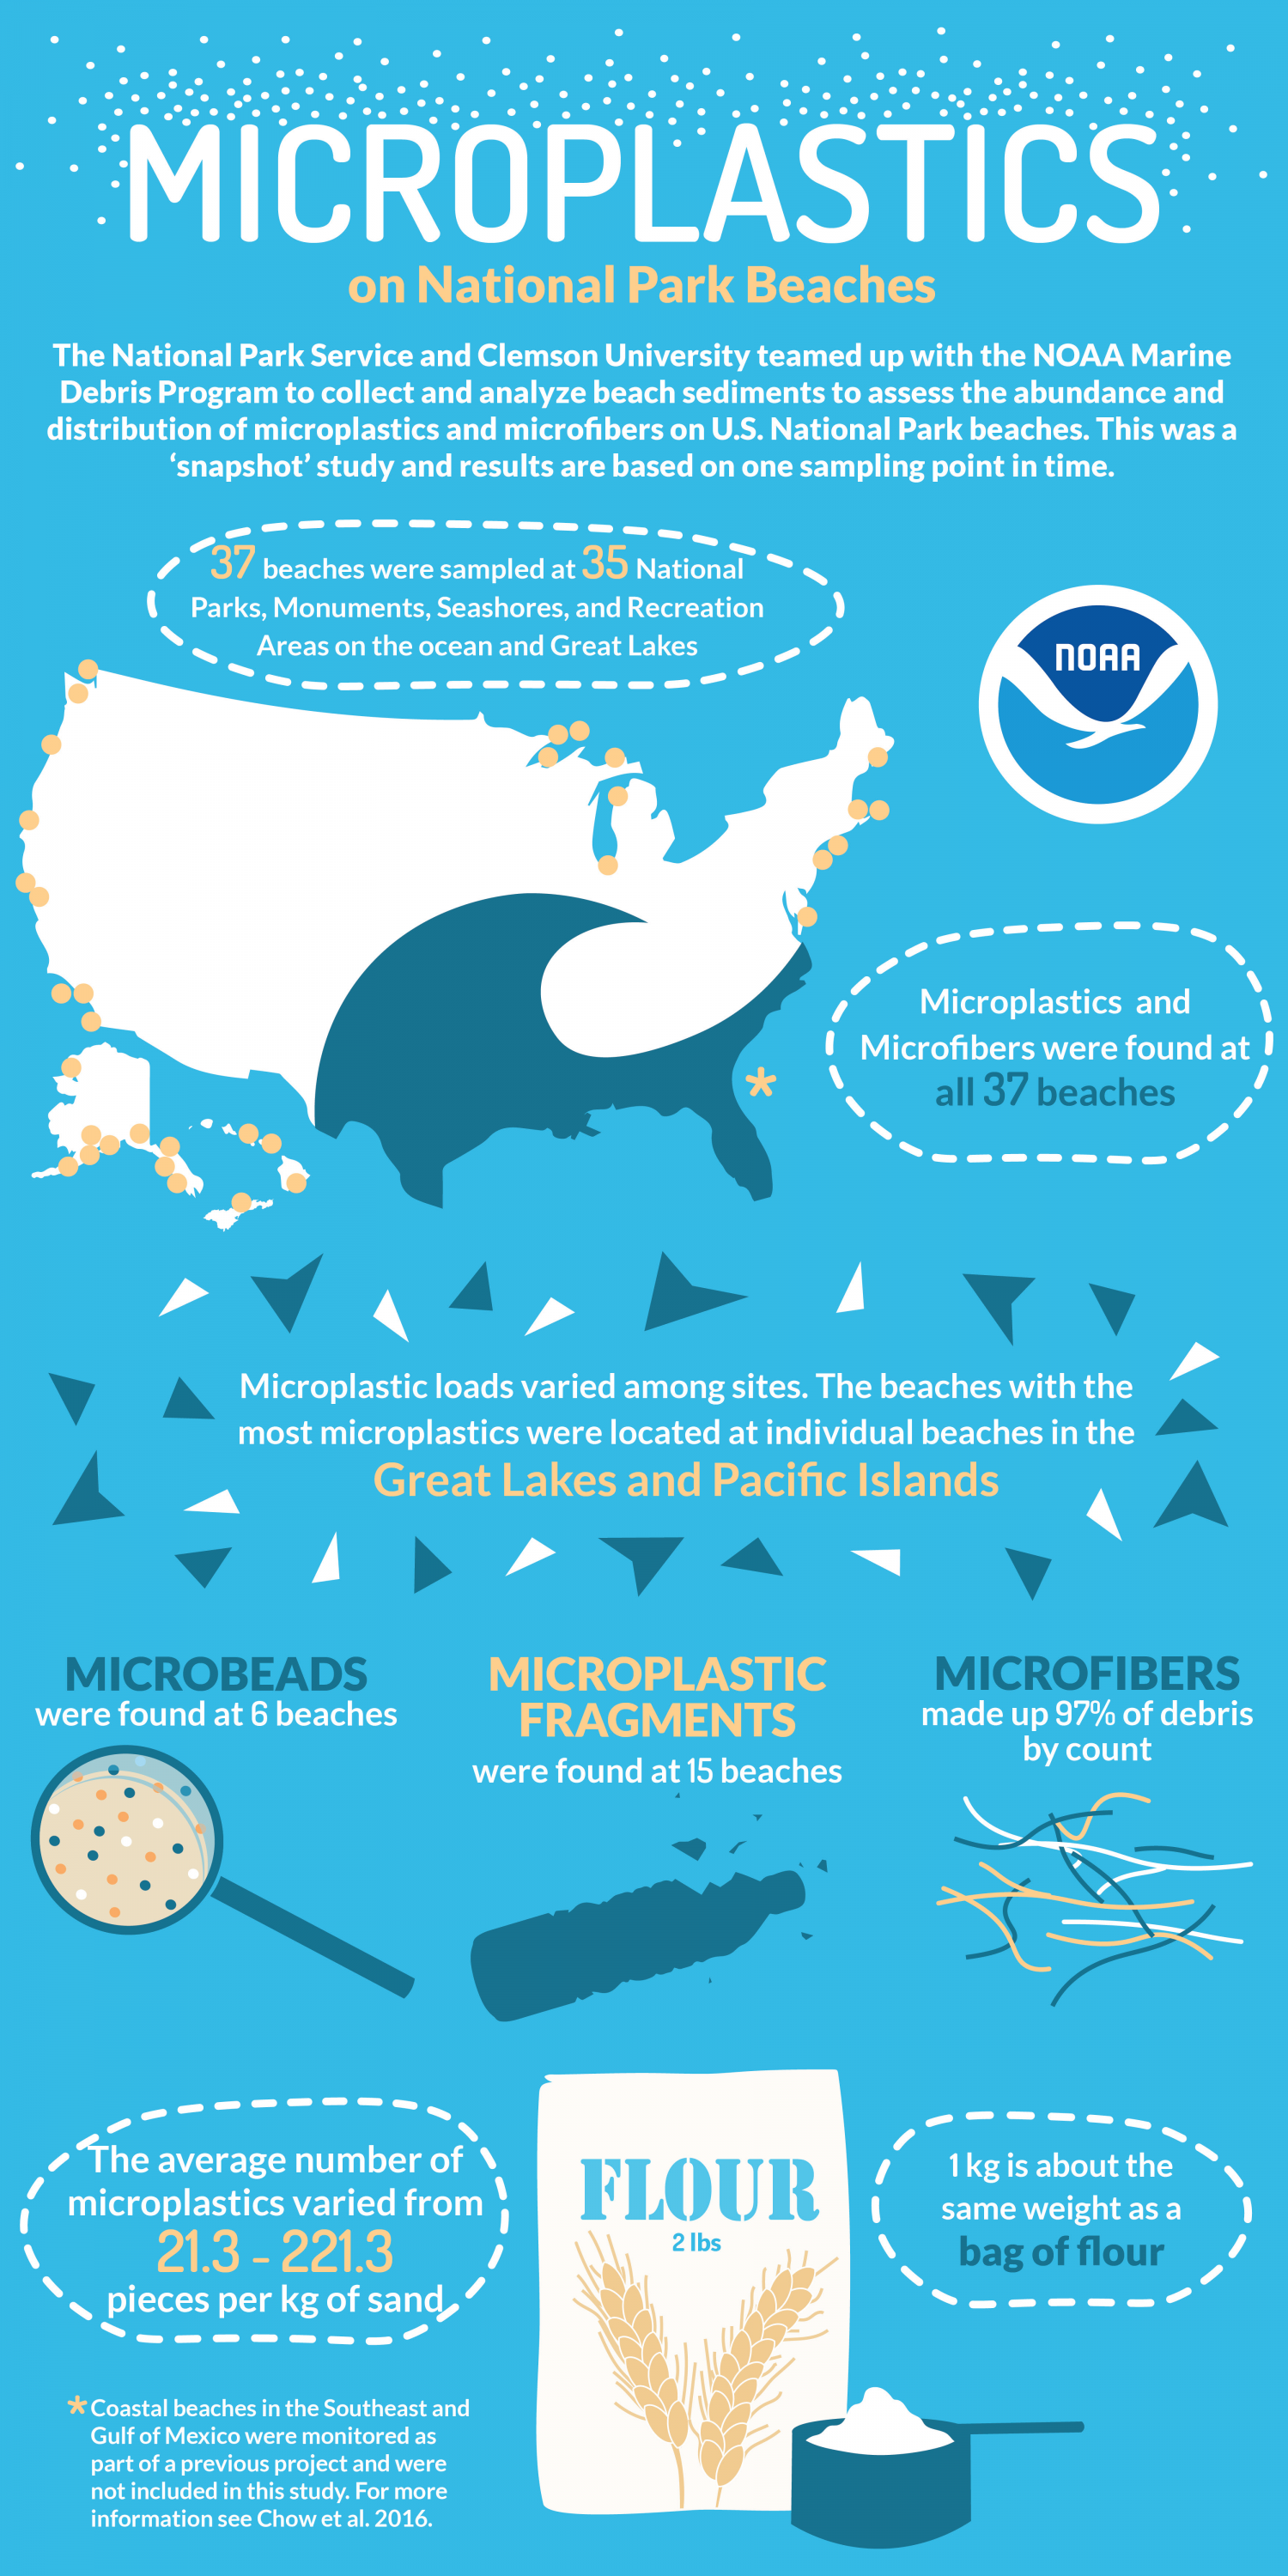 https://www.nps.gov/subjects/oceans/images/MicroplasticsonNationalParkBeachesInfographic_FINALVERSION.png